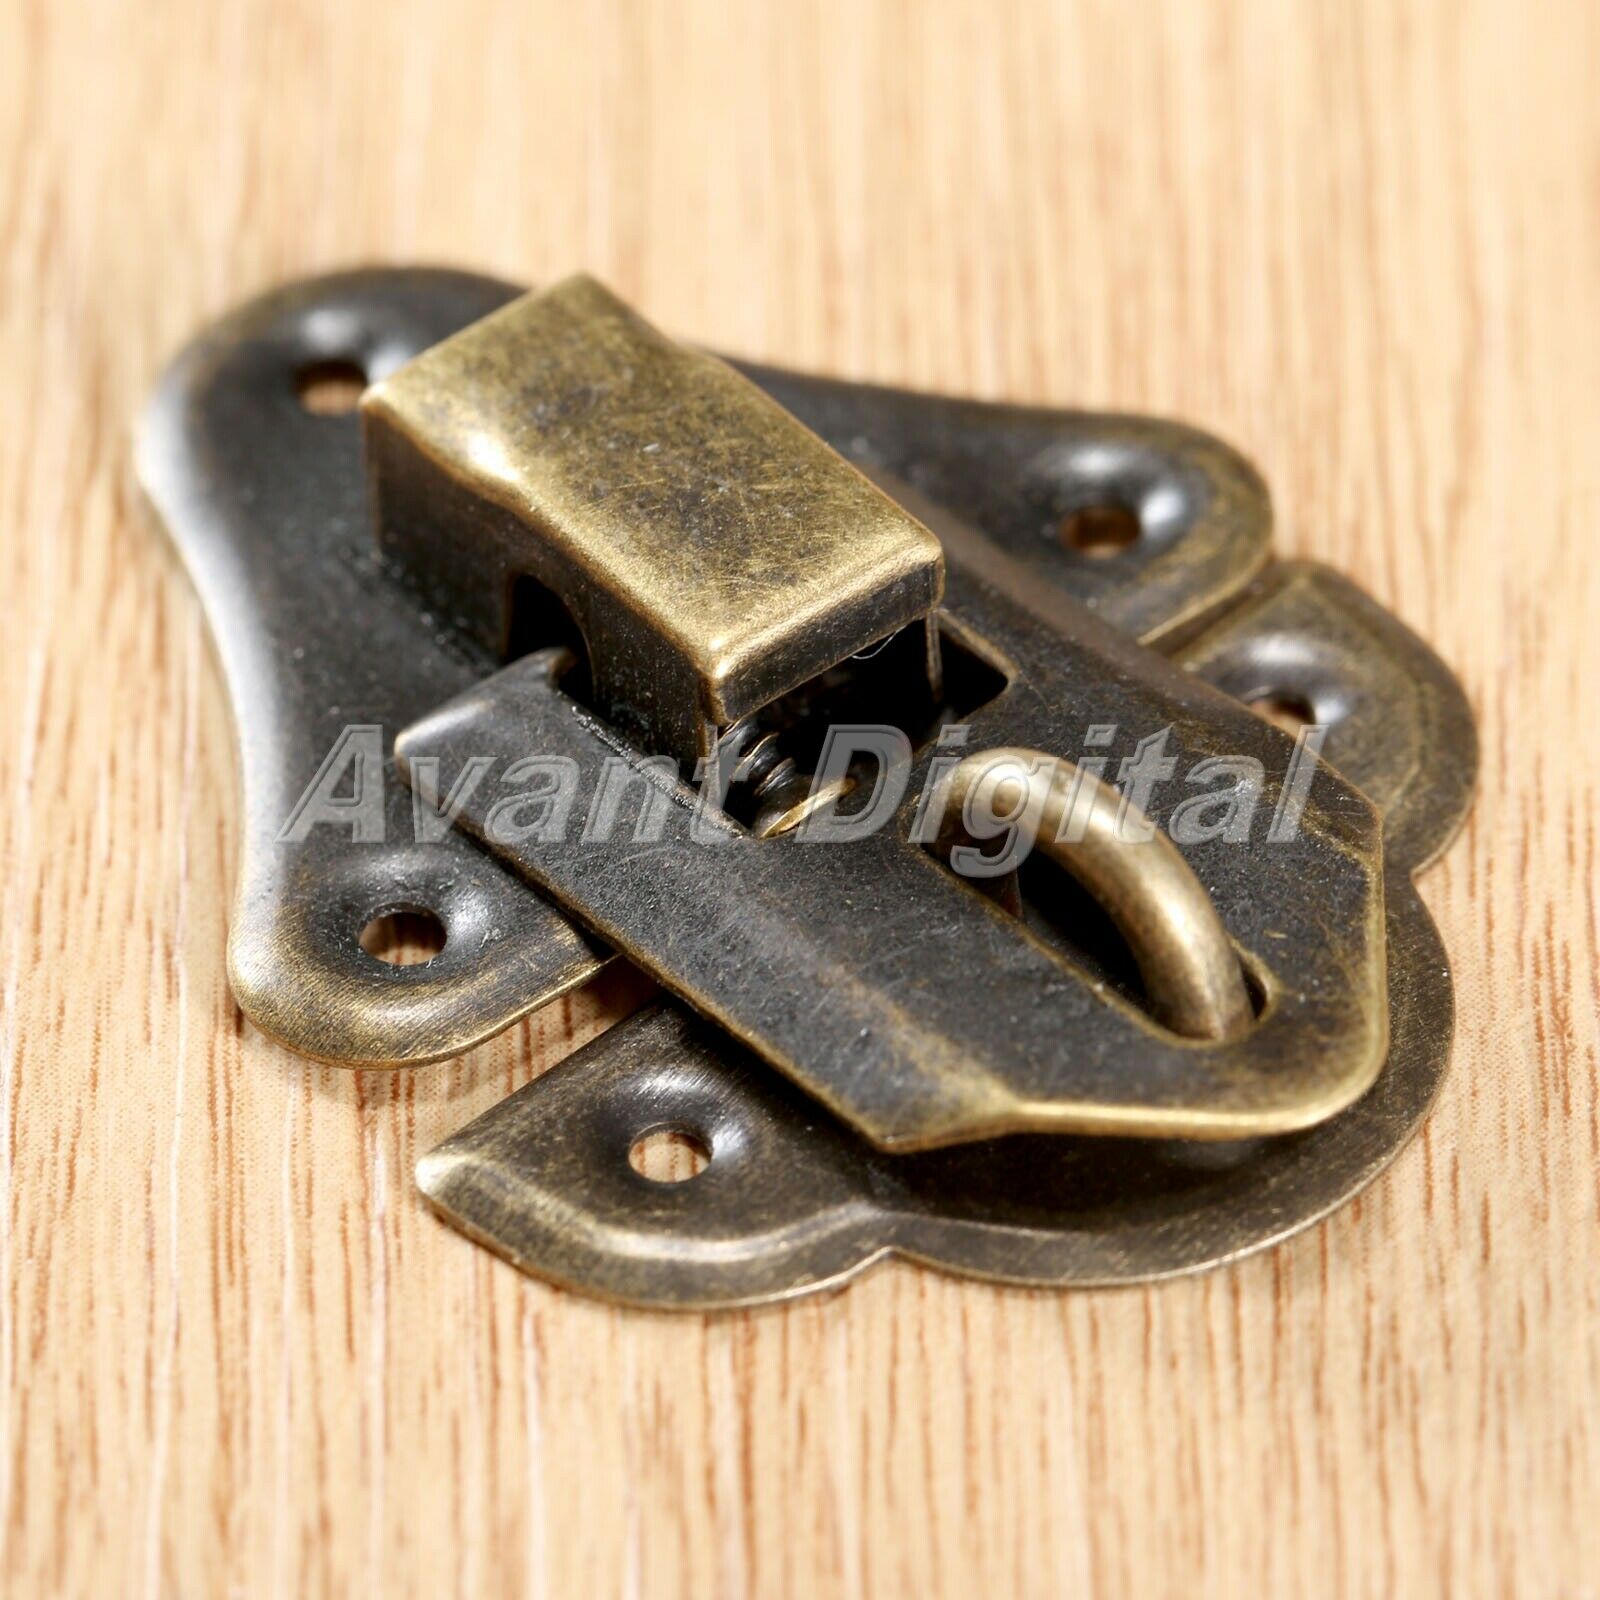 Retro Jewelry Boxes Suitcase Cabinet Toggle Latch Catch Hasp & Chinese Old Lock